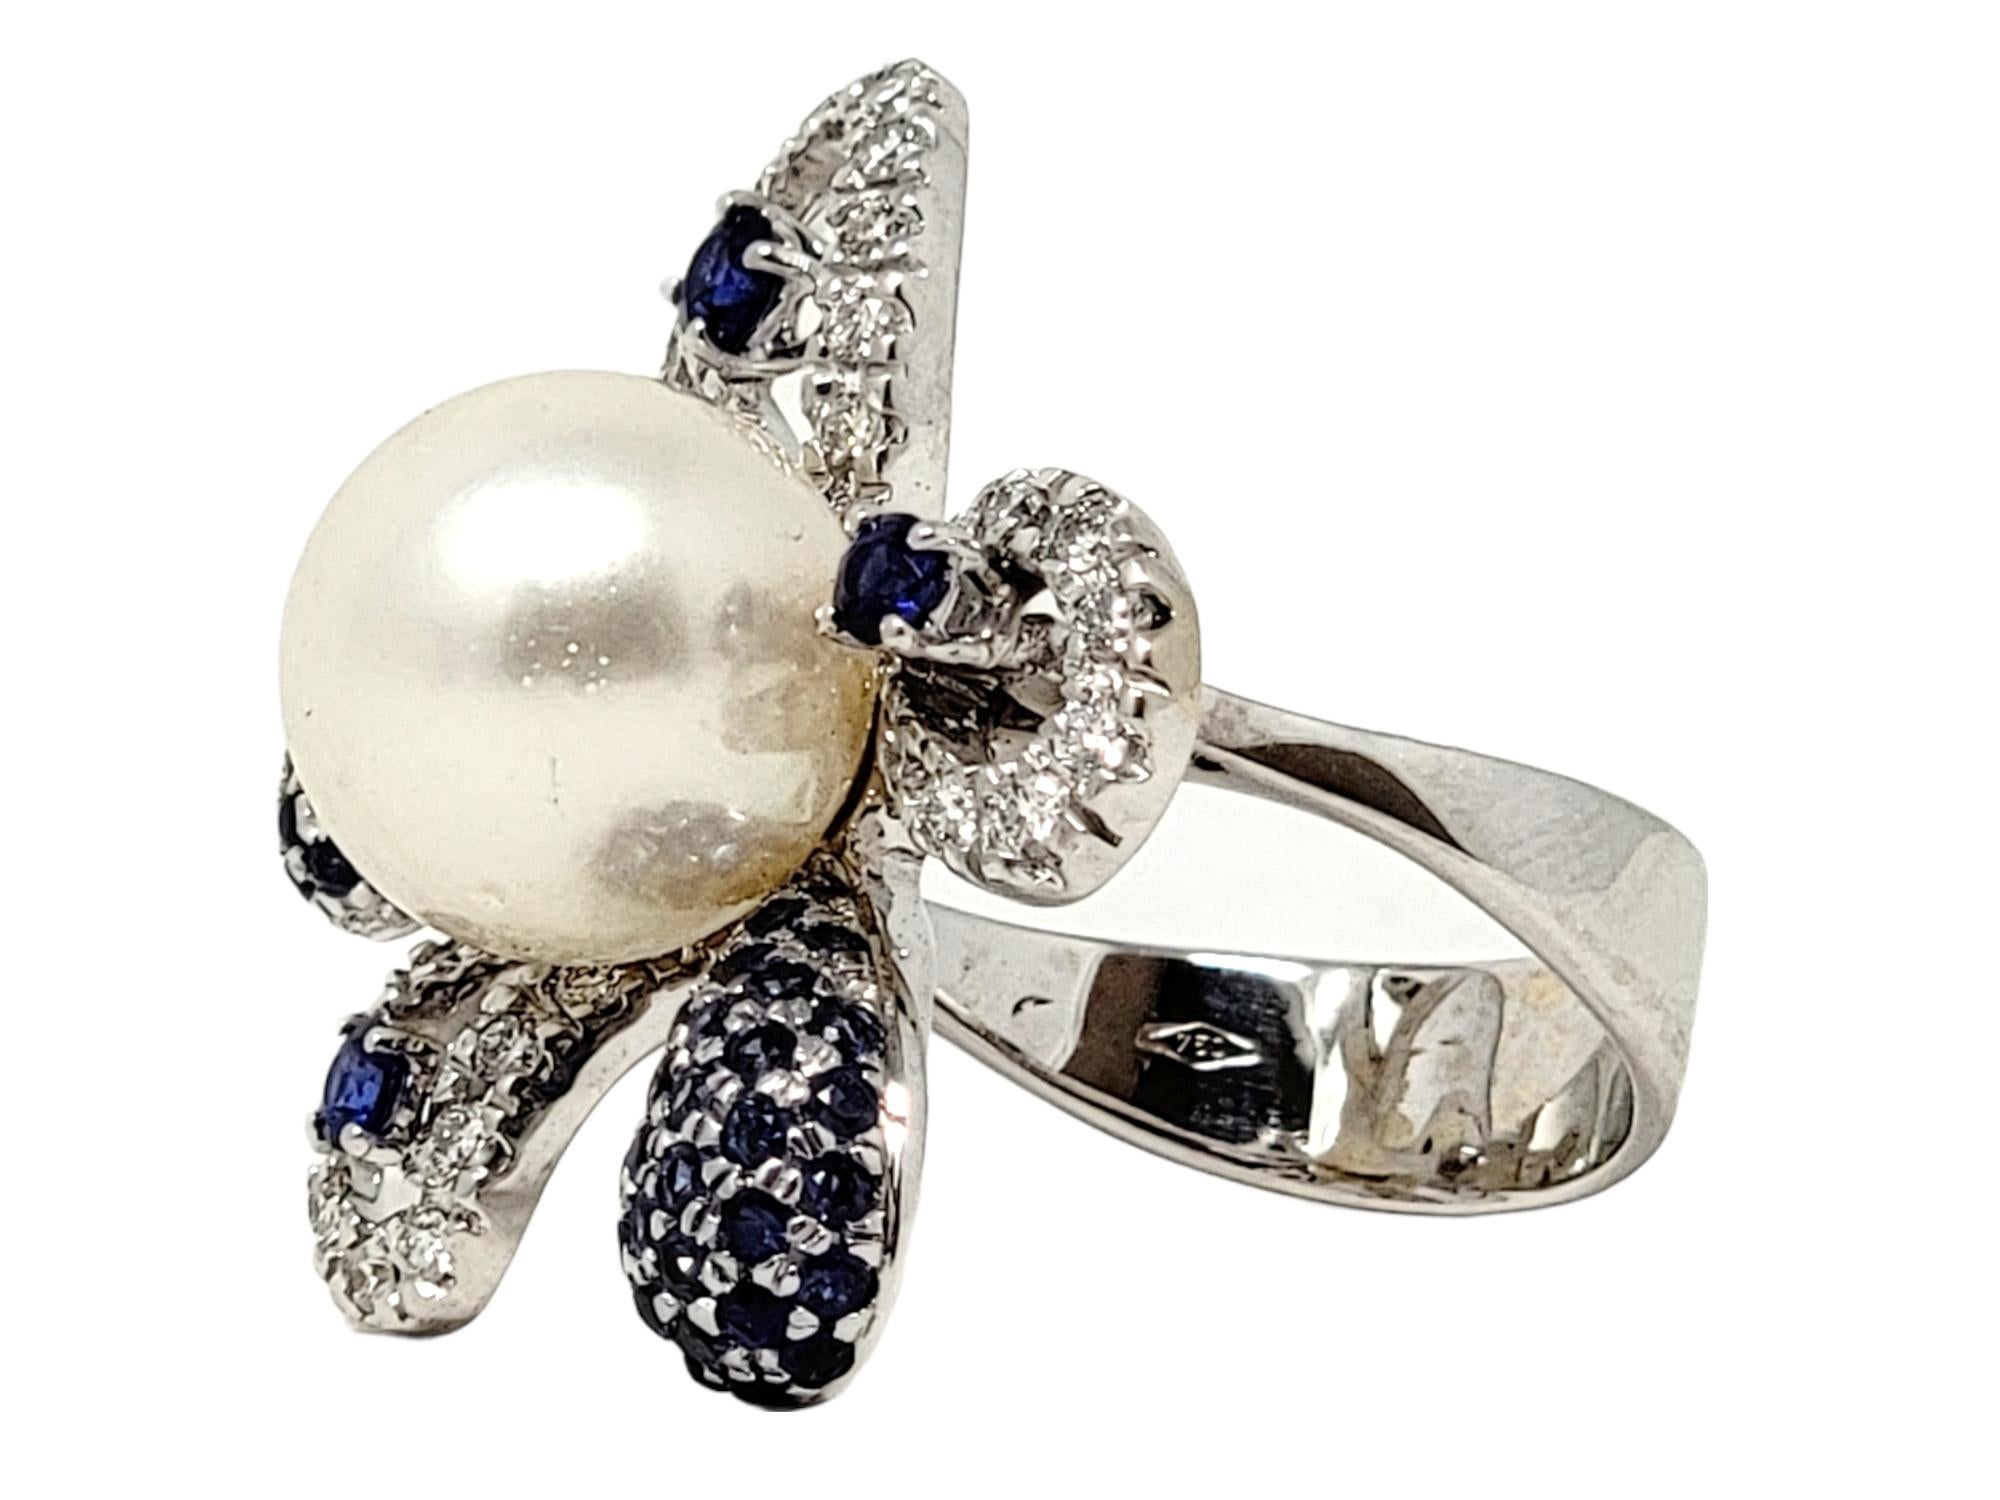 South Sea Cultured Pearl Flower Cocktail Ring with Diamond and Sapphire Petals In Good Condition For Sale In Scottsdale, AZ